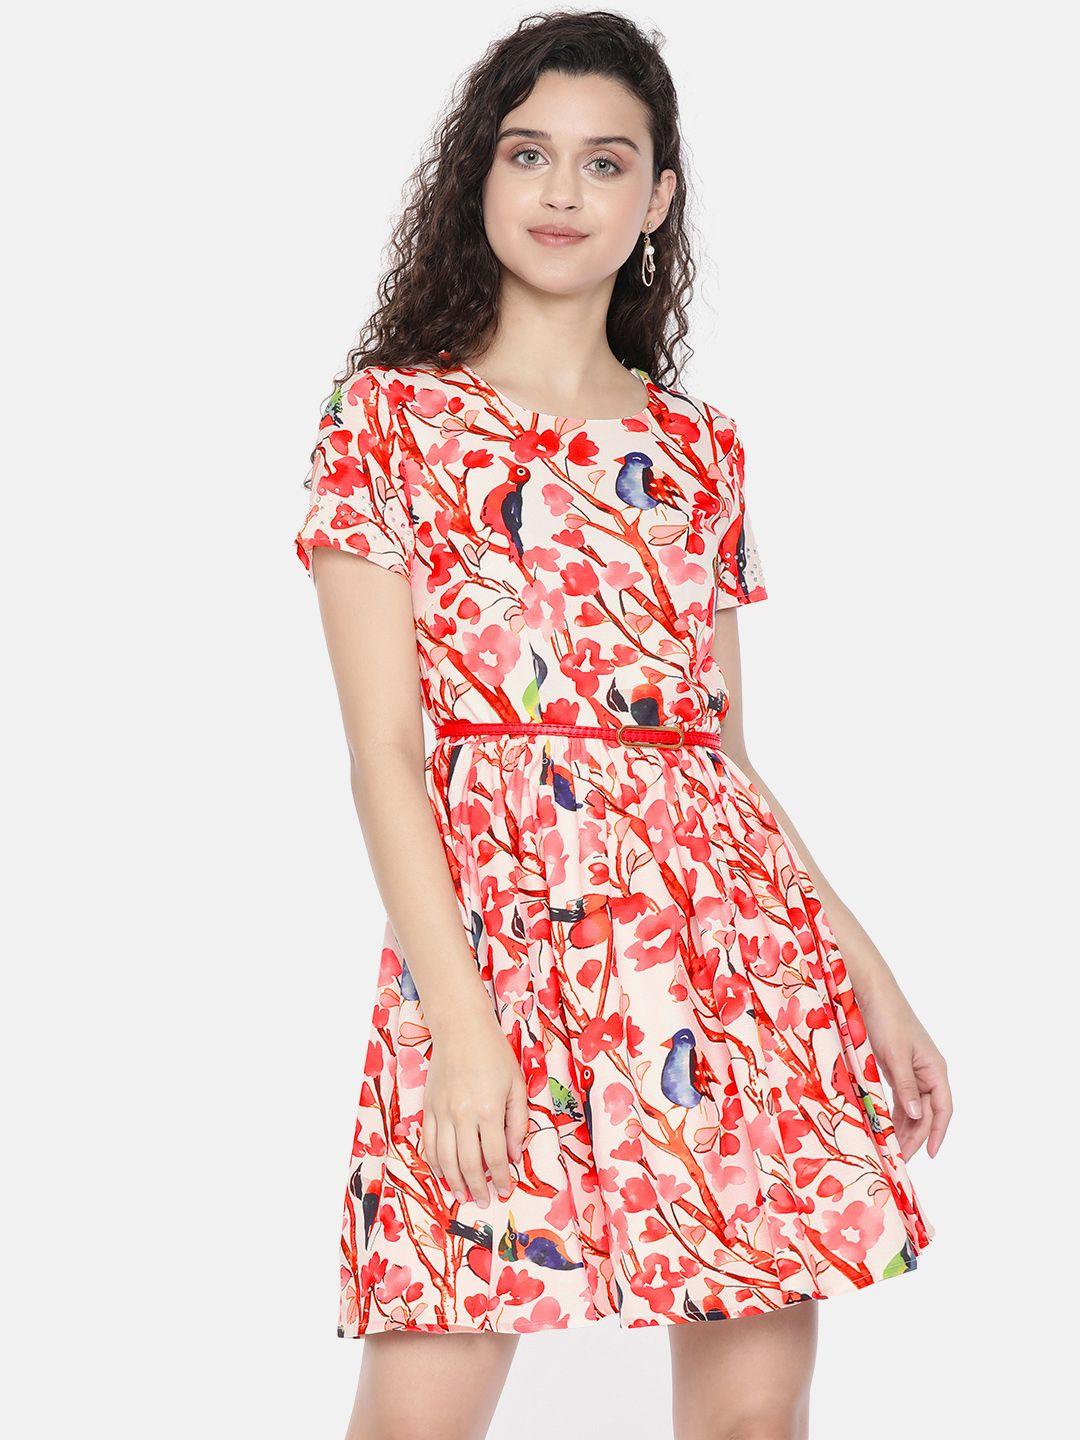 jc collection women white & red printed fit & flare dress